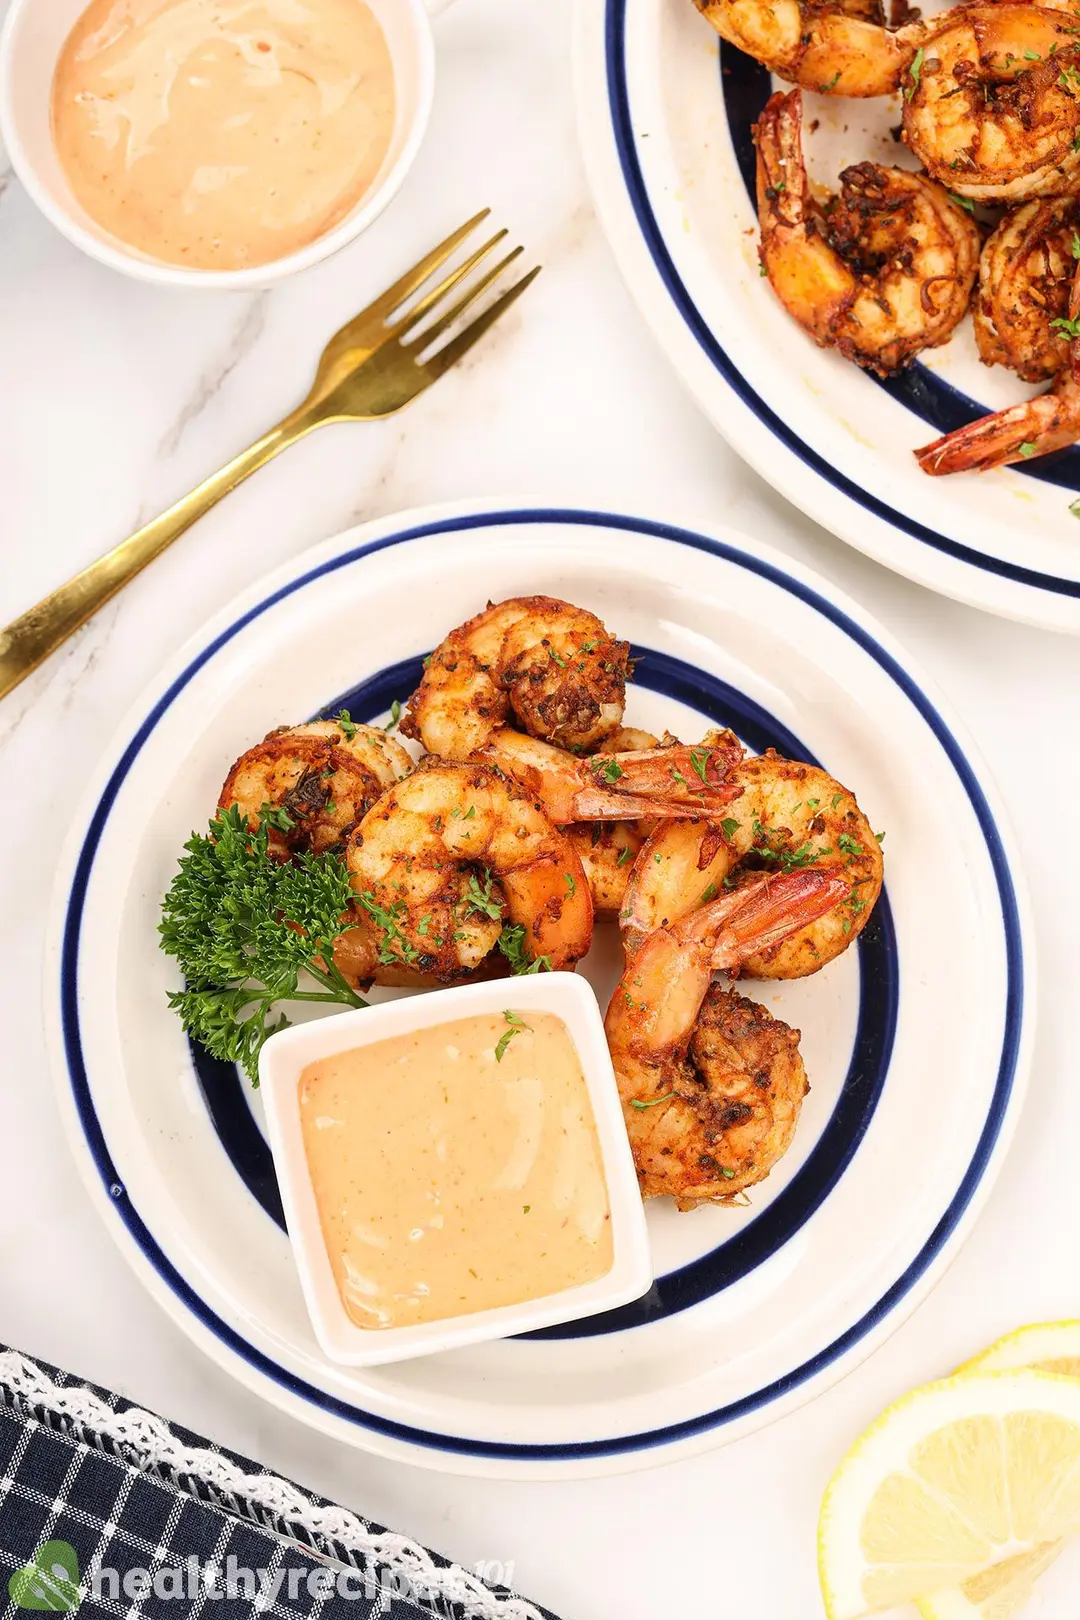 What to Serve With Air Fryer Shrimp